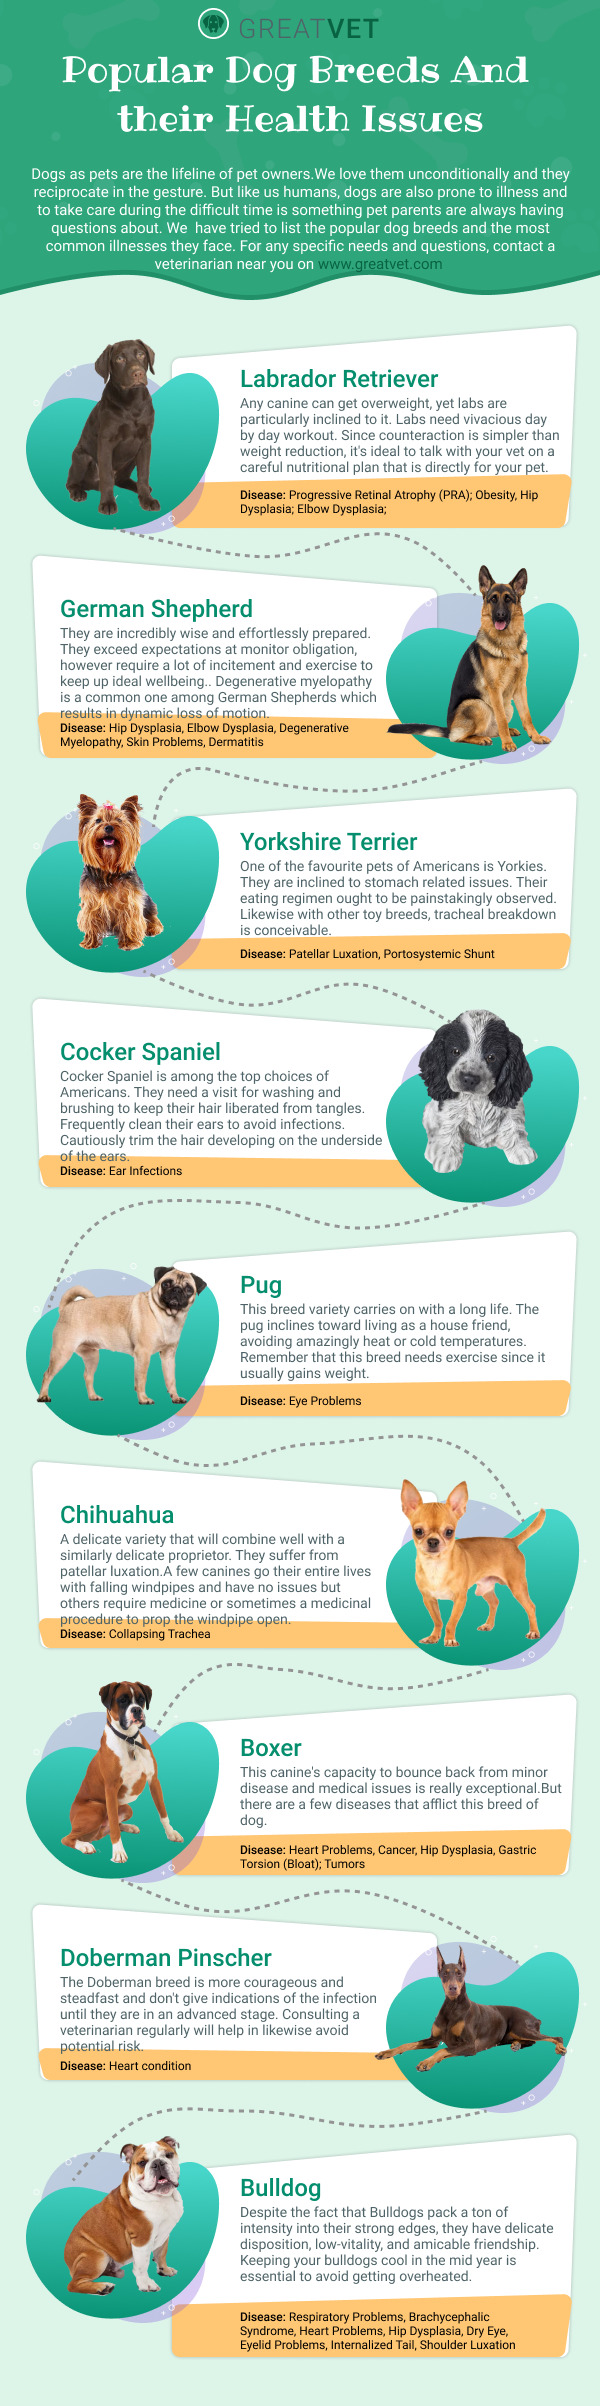 Popular Dog Breeds and their Health Issues Infographic - GreatVet